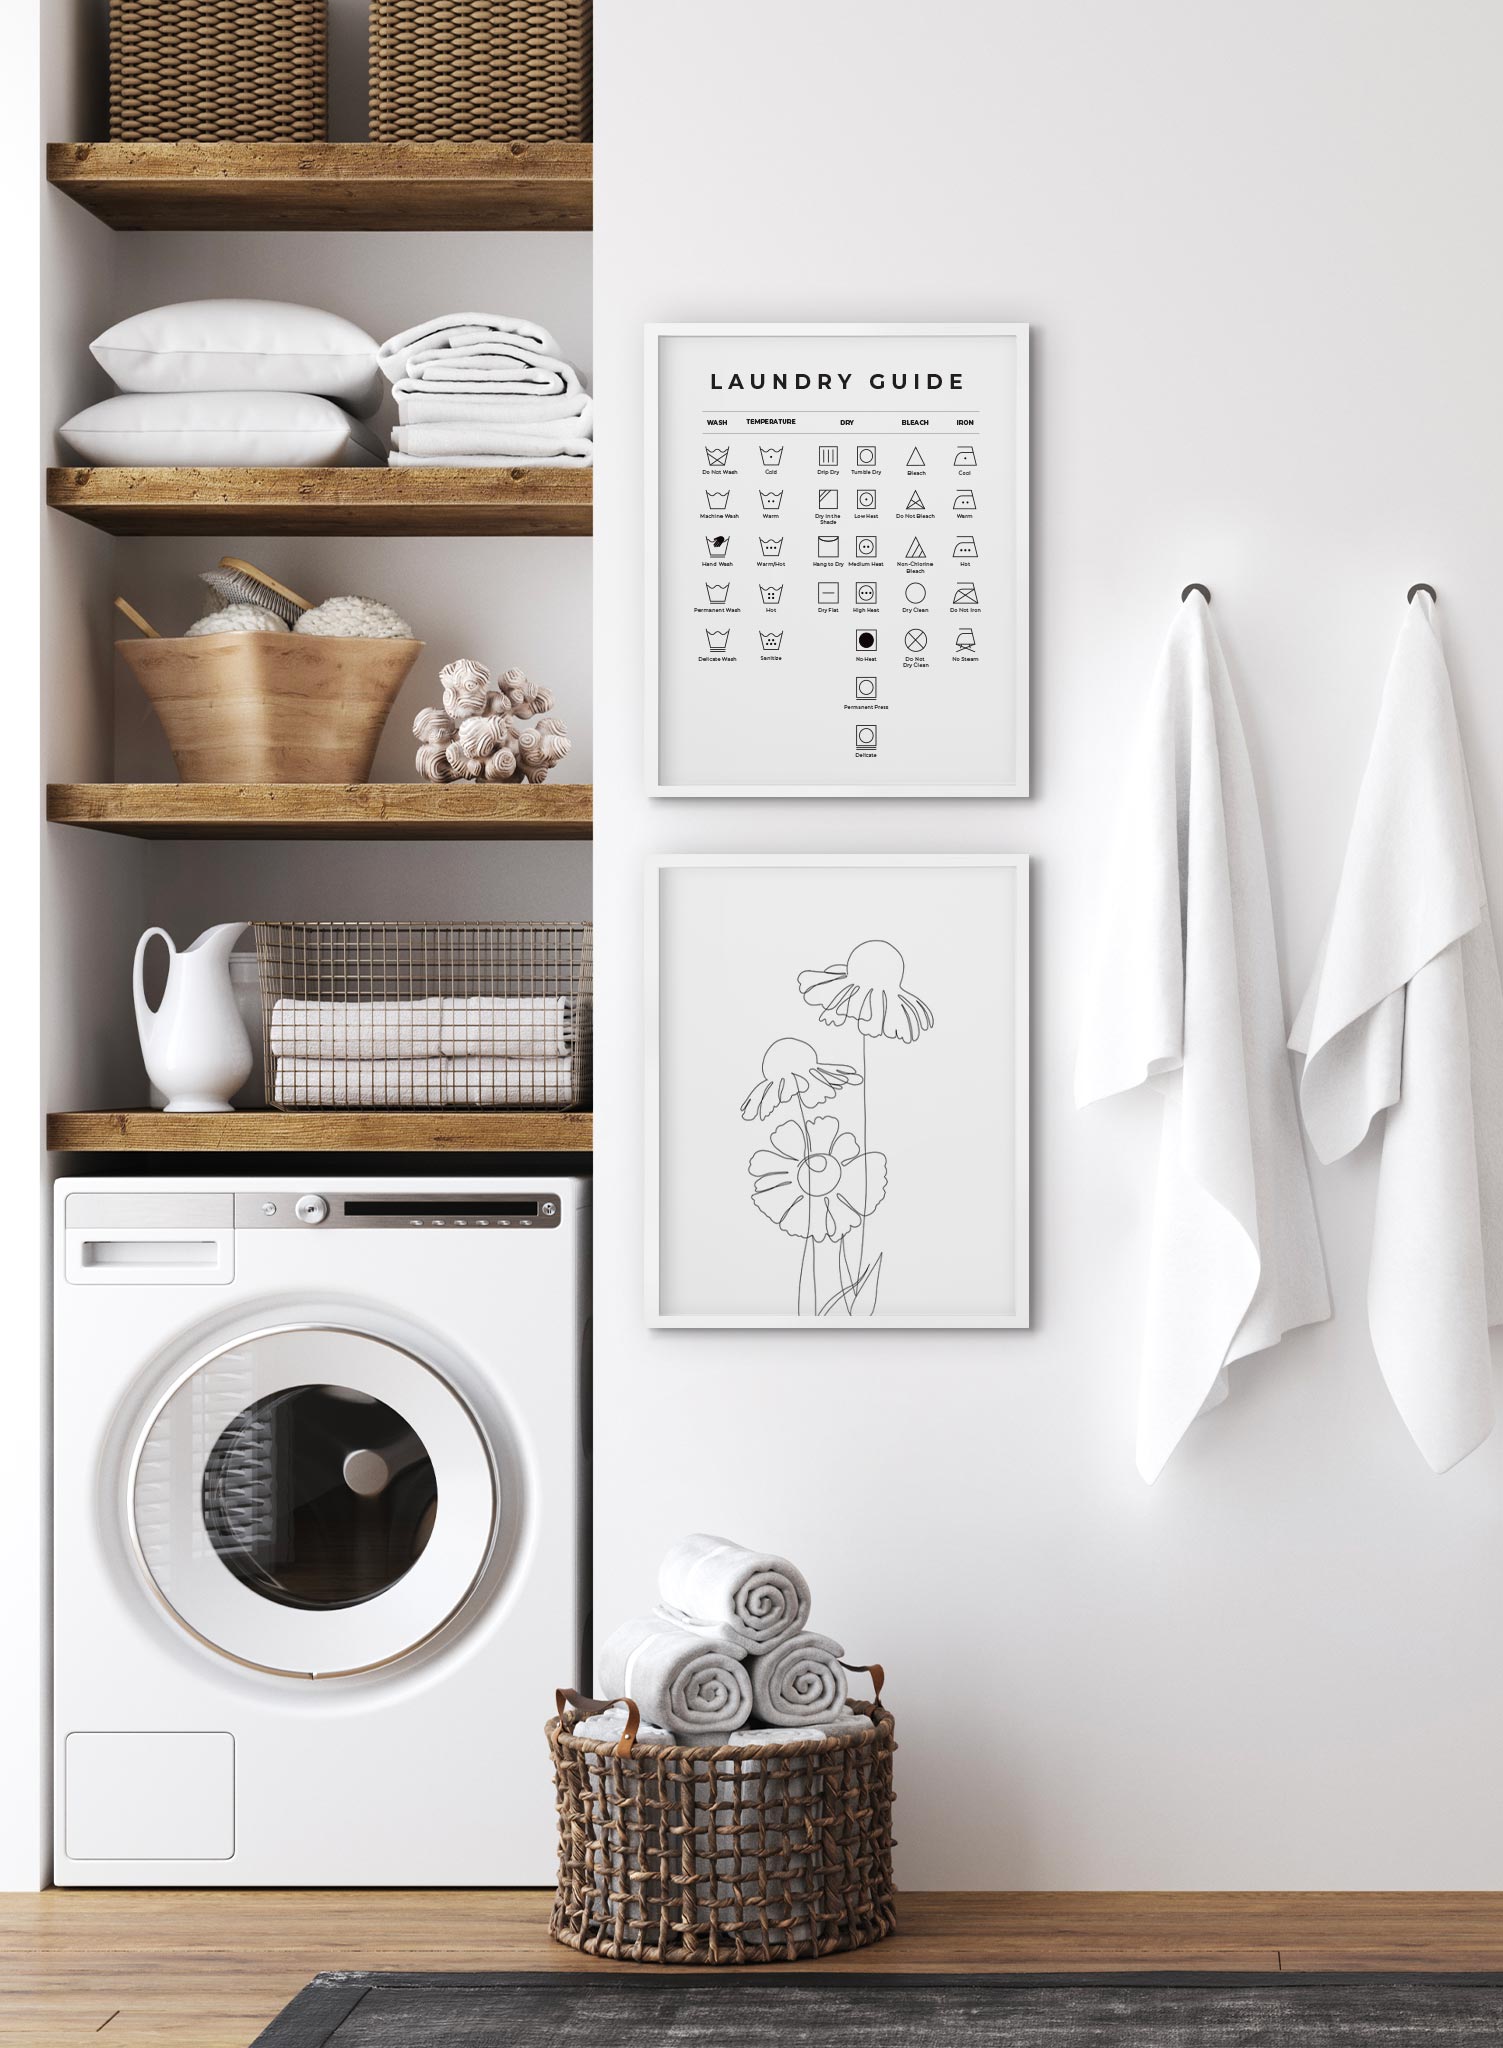 Laundry Guide is a minimalist typography by Opposite Wall of a chart of laundry symbols and their meaning. 